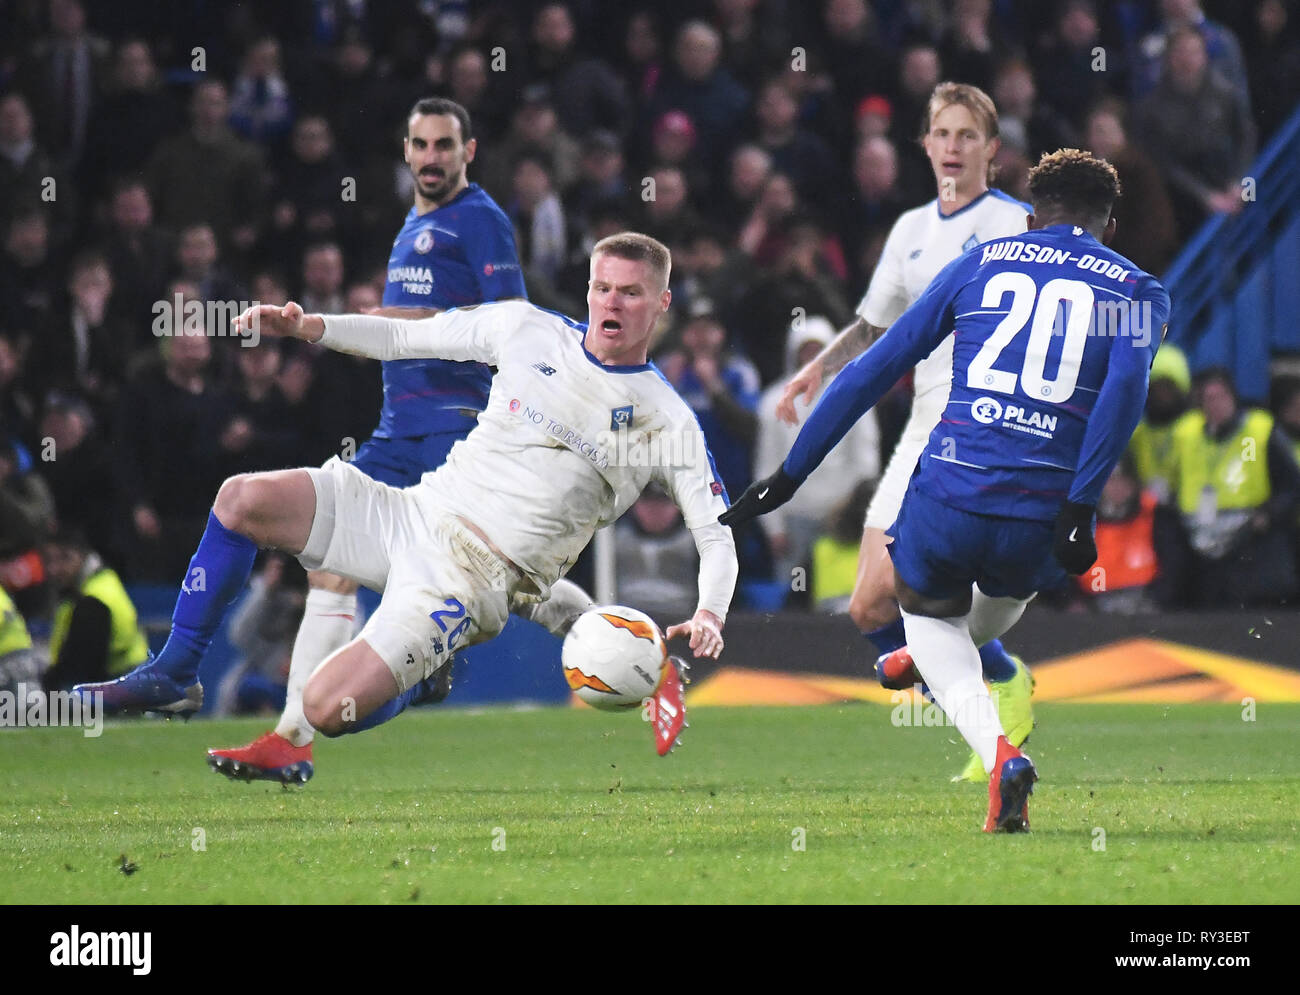 LONDON, ENGLAND - MARCH 7, 2019: Mykyta Burda of Dynamo tries to stop a shot that went in from Callum Hudson-Odoi of Chelsea during the first leg of the 2018/19 UEFA Europa League Last 16 Round game between Chelsea FC (England) and Dynamo Kyiv (Ukraine) at Stamford Bridge. Stock Photo